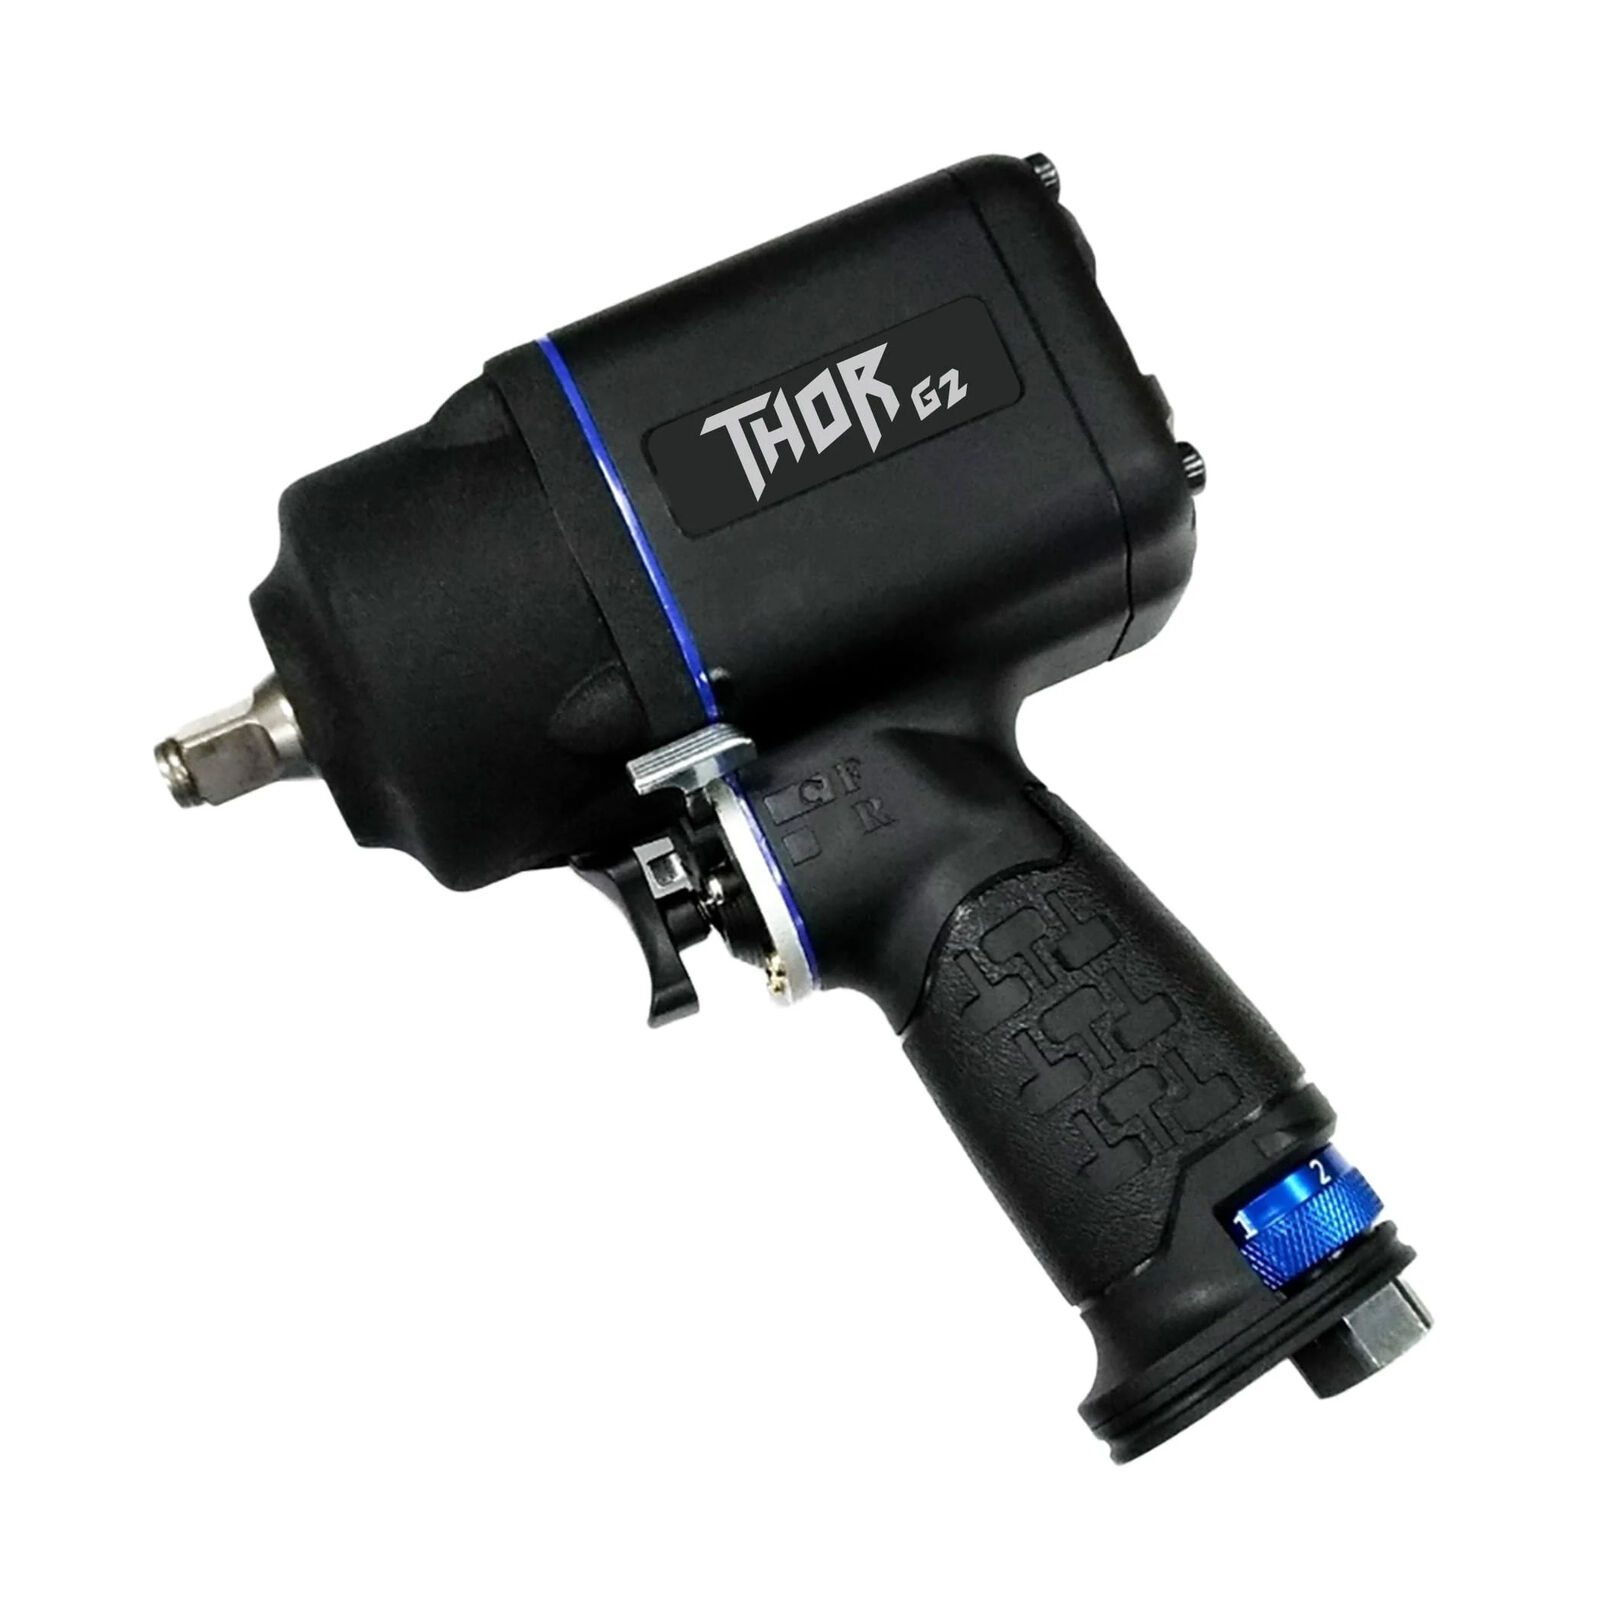 Astro Pneumatic Onyx 1/2" Thor G2 Impact Wrench New